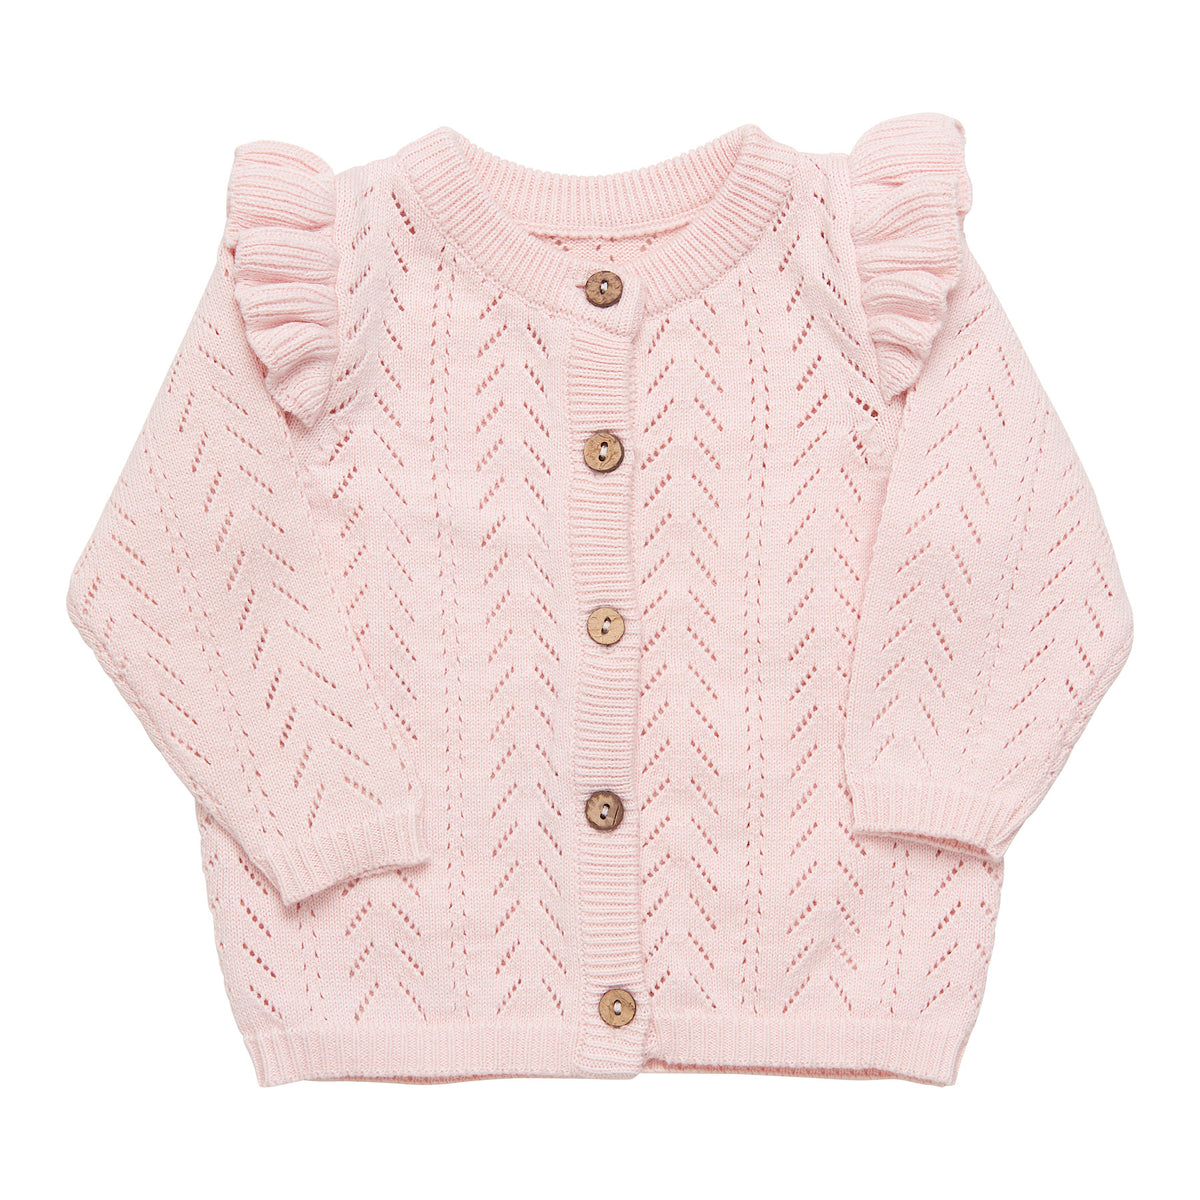 Knit Cardigan with Wooden Button Details, Peachy Pink